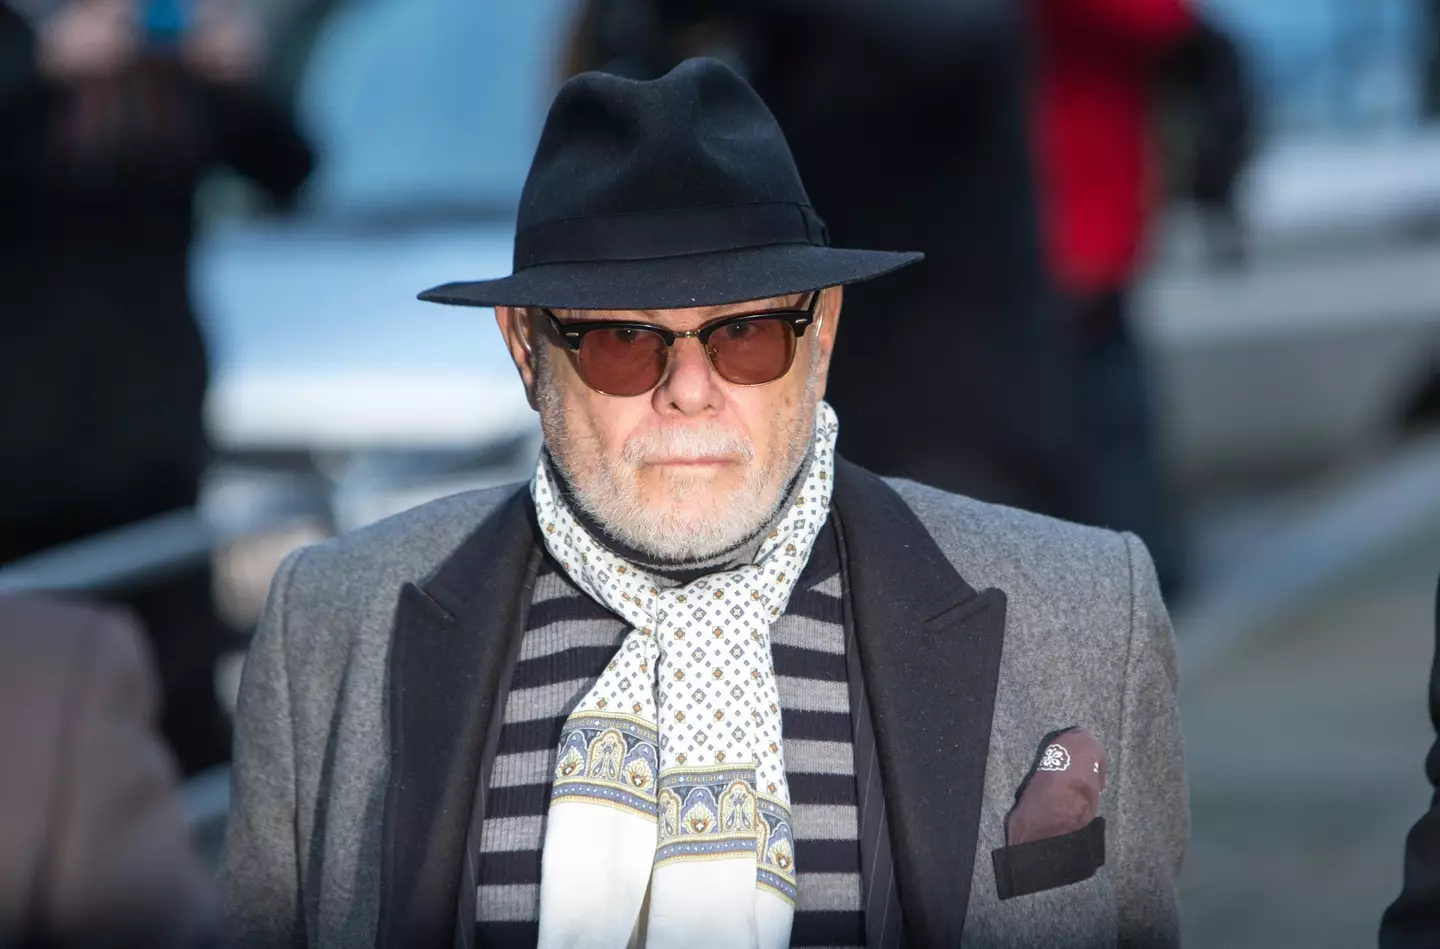 Gary Glitter has been recalled to prison after being released last month.